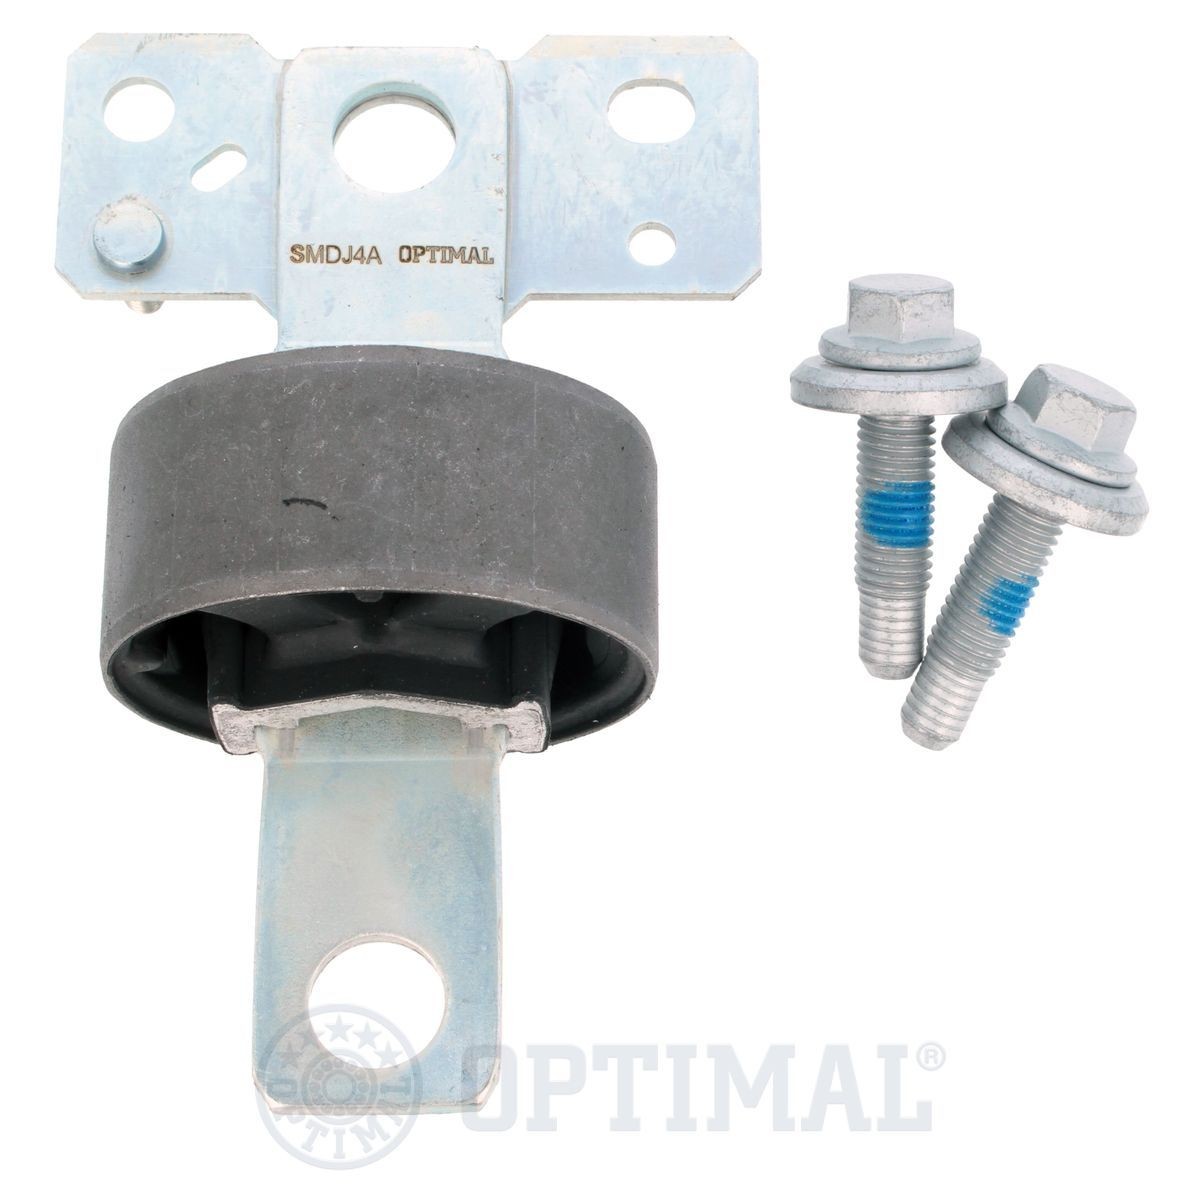 OPTIMAL with fastening material, Rear Axle, Front, Left, Rubber-Metal Mount Arm Bush F8-7877S buy